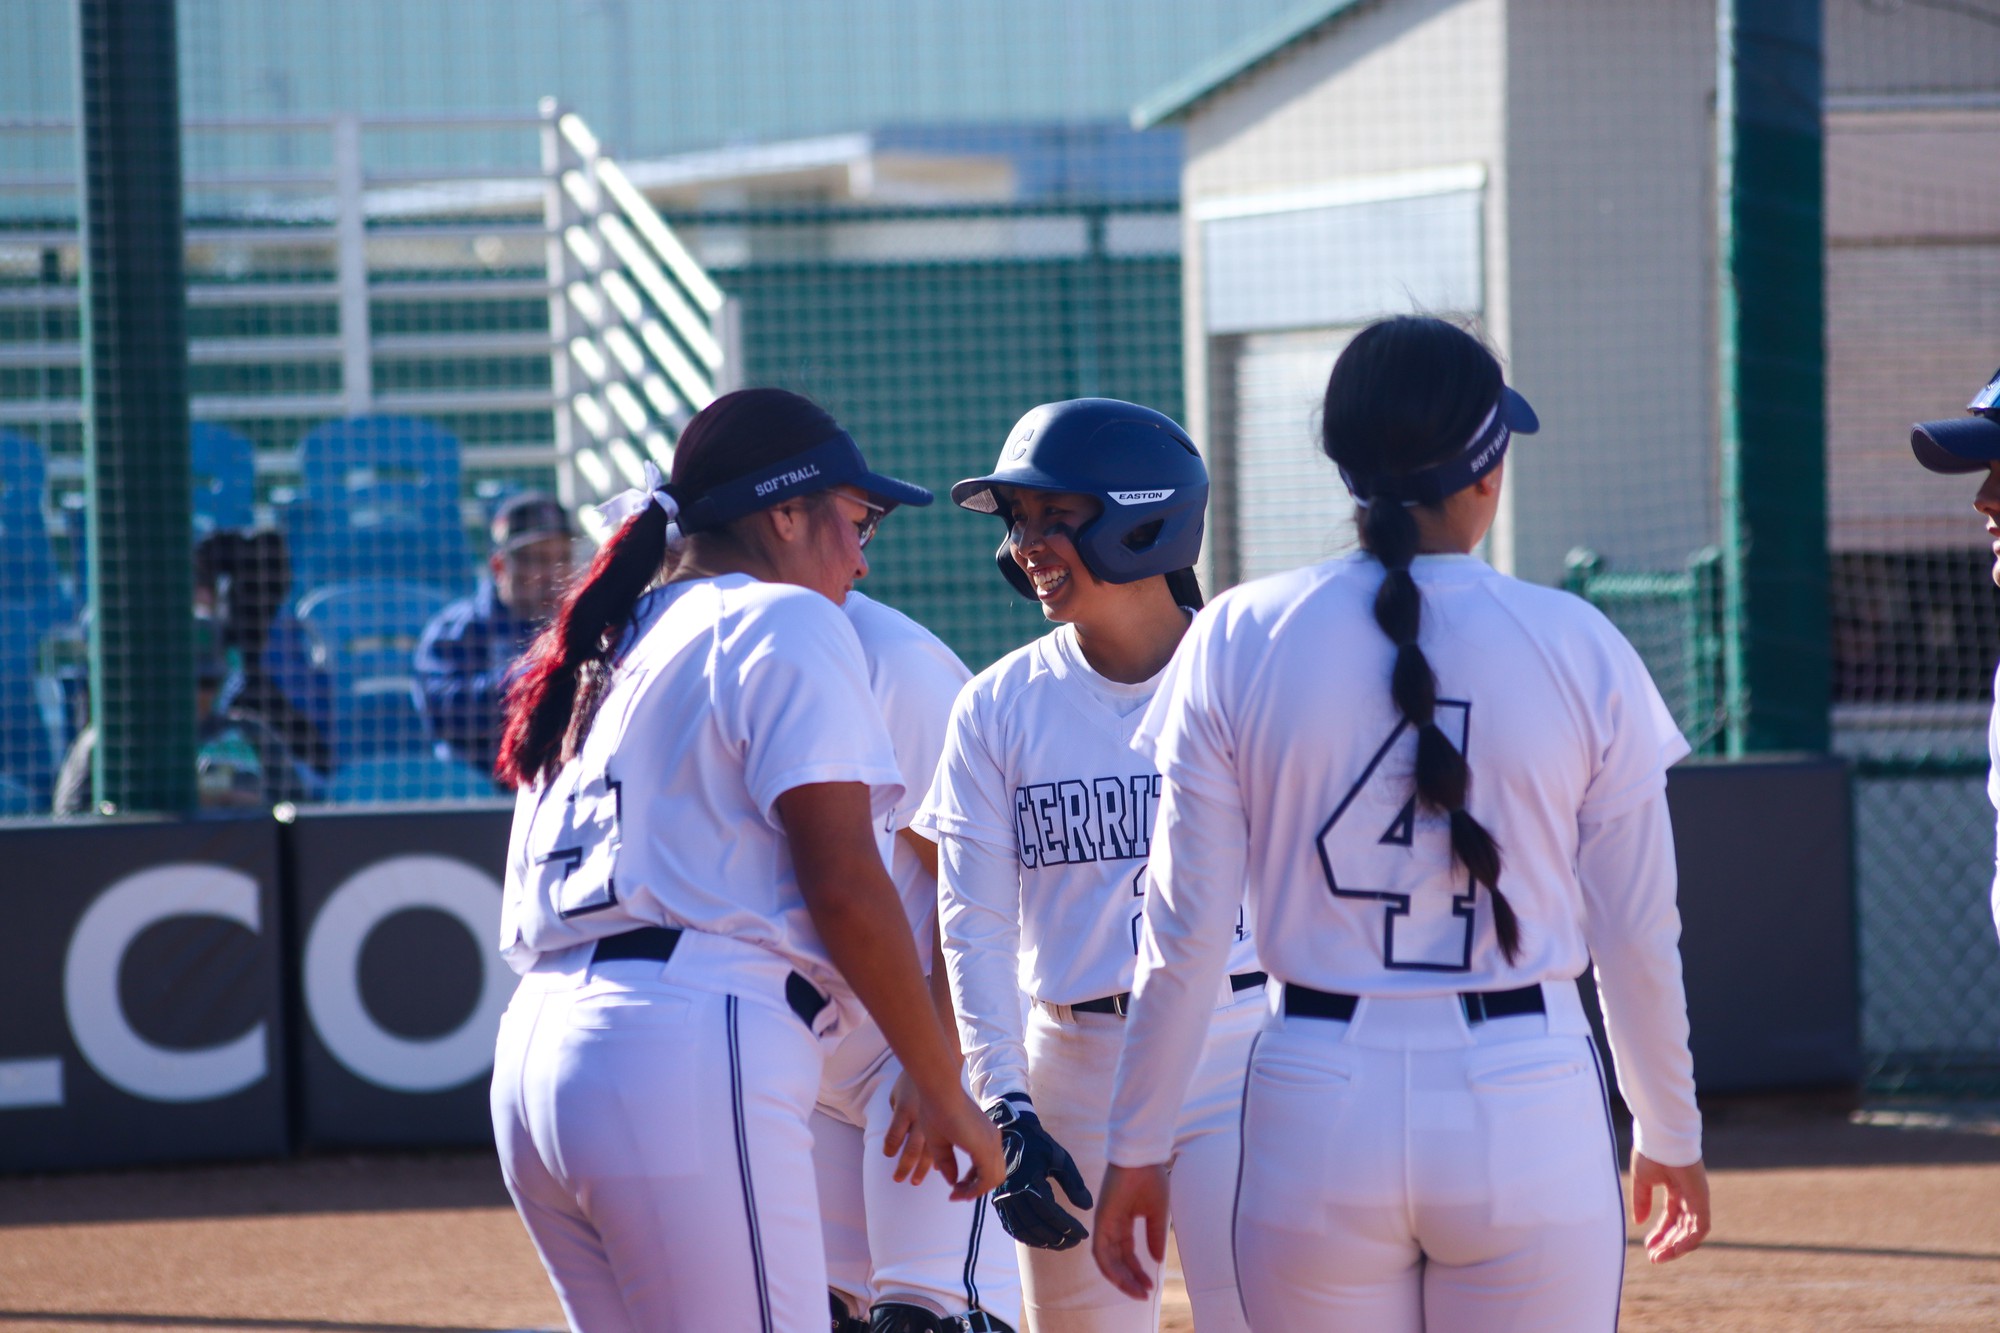 Outfielder, Jocelyn Doan, smiling as she heads back to the dugout giving her teammates high fives.